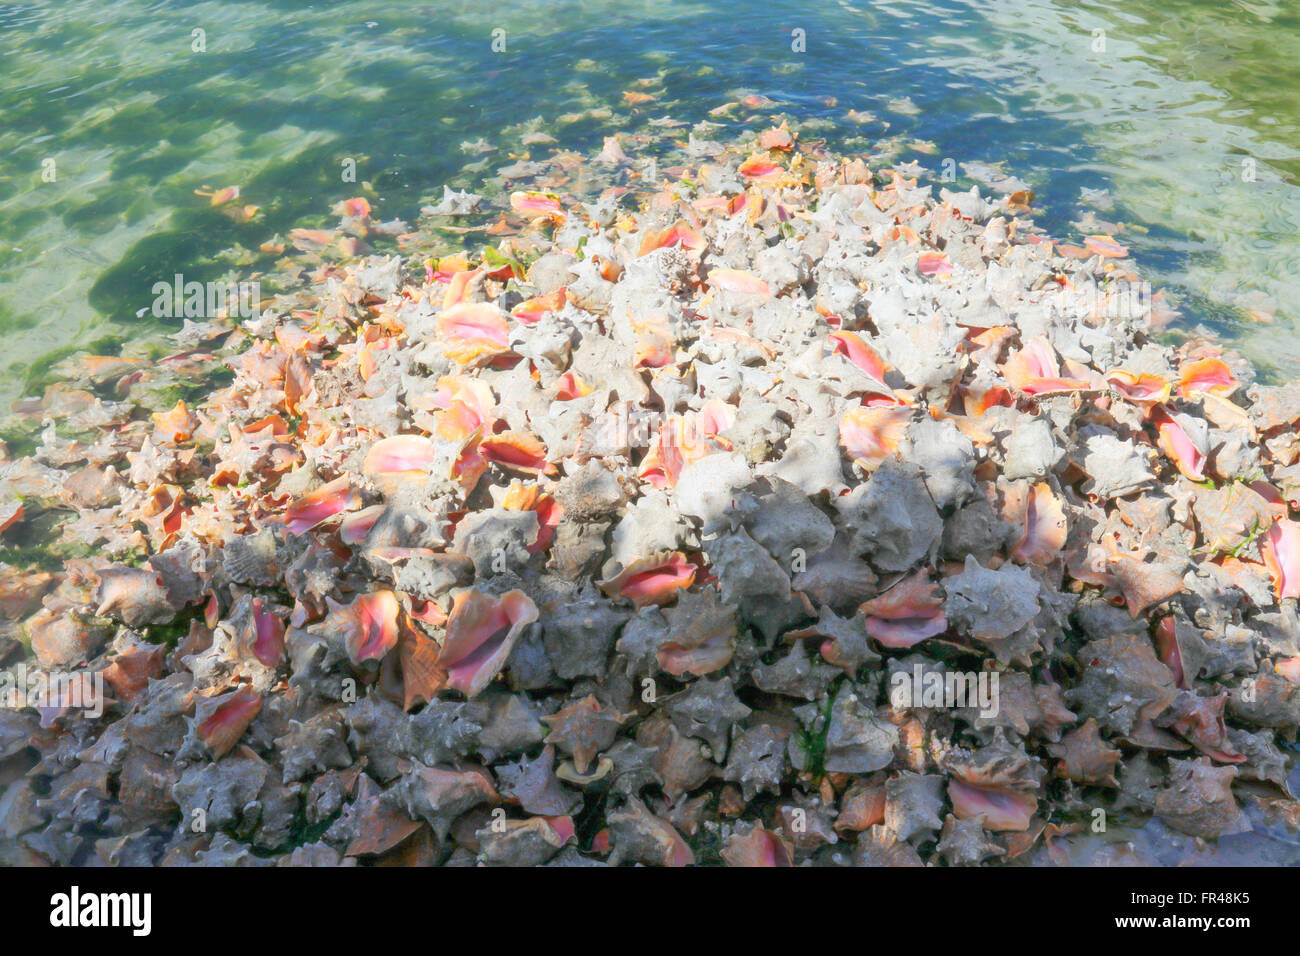 Animals: Pile of conch shells Stock Photo